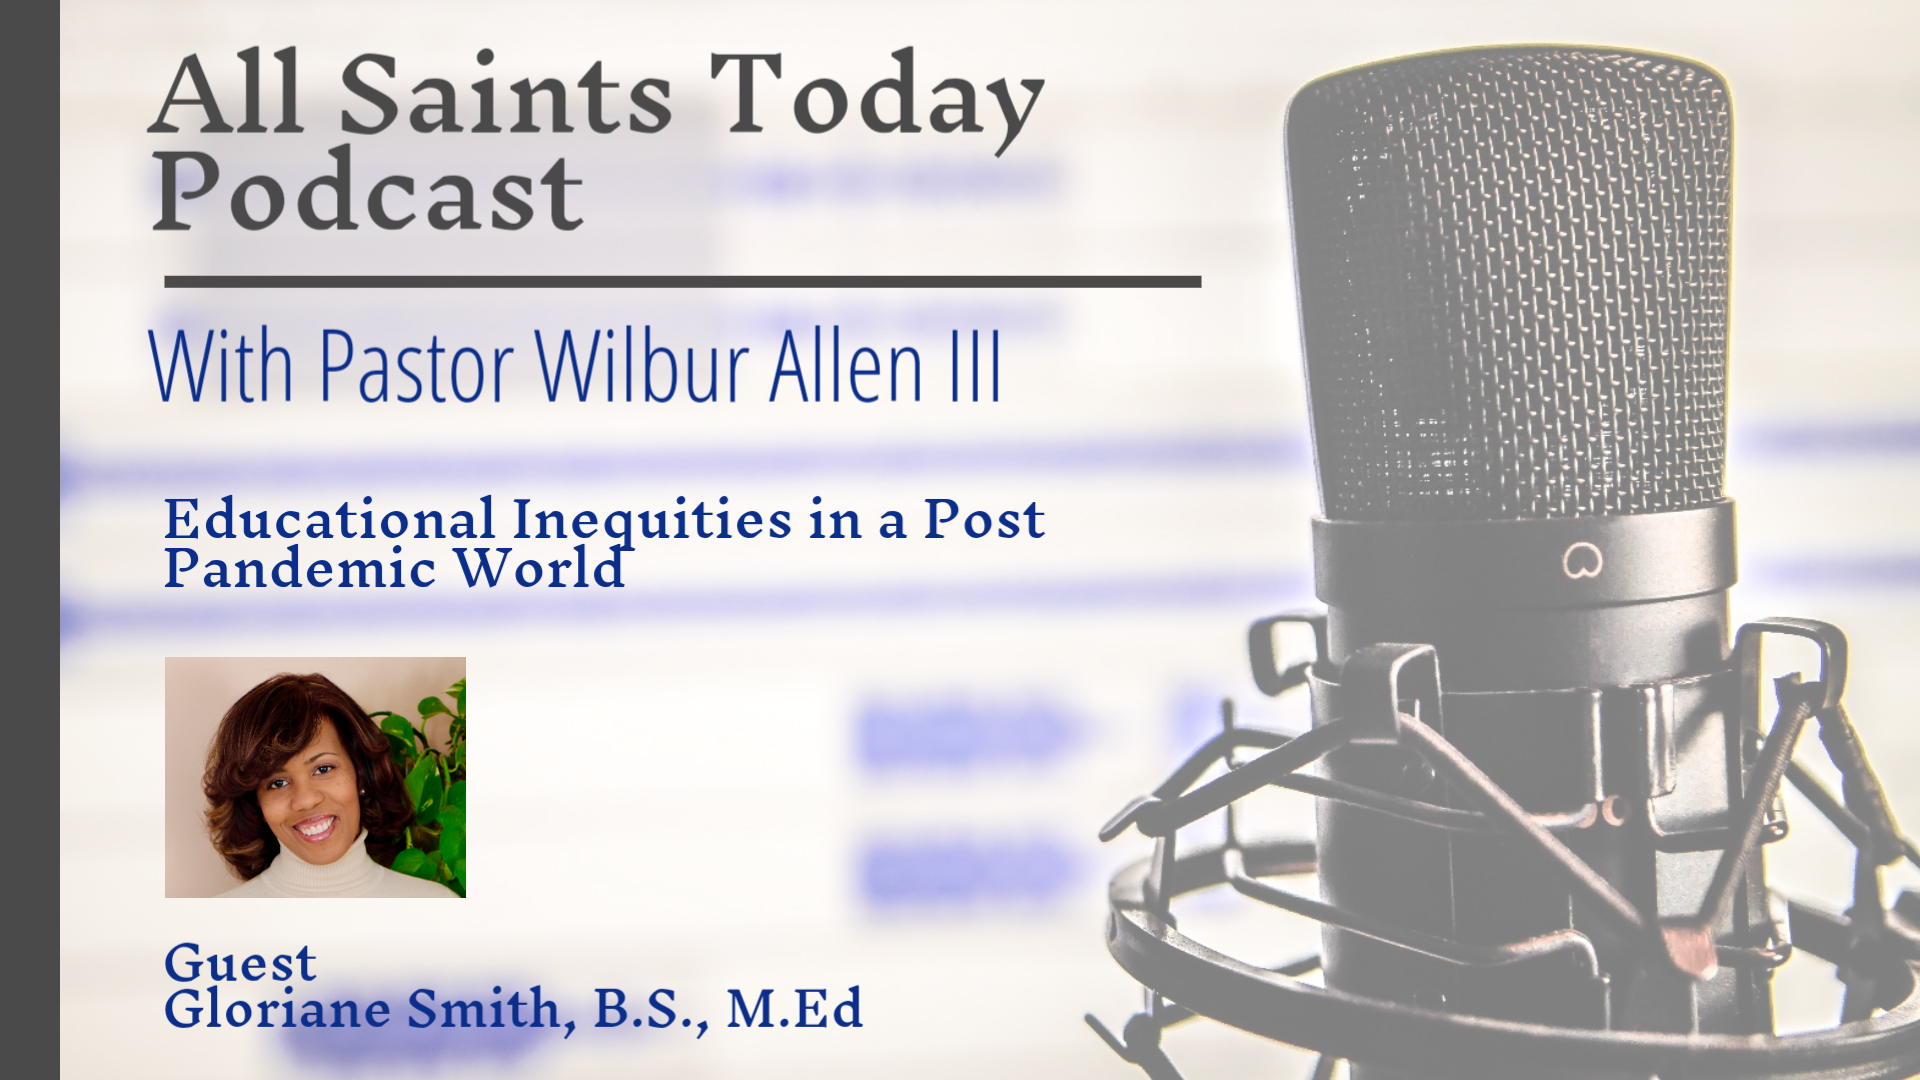 All Saints Today Podcast - Educational Inequities in a Post Pandemic World